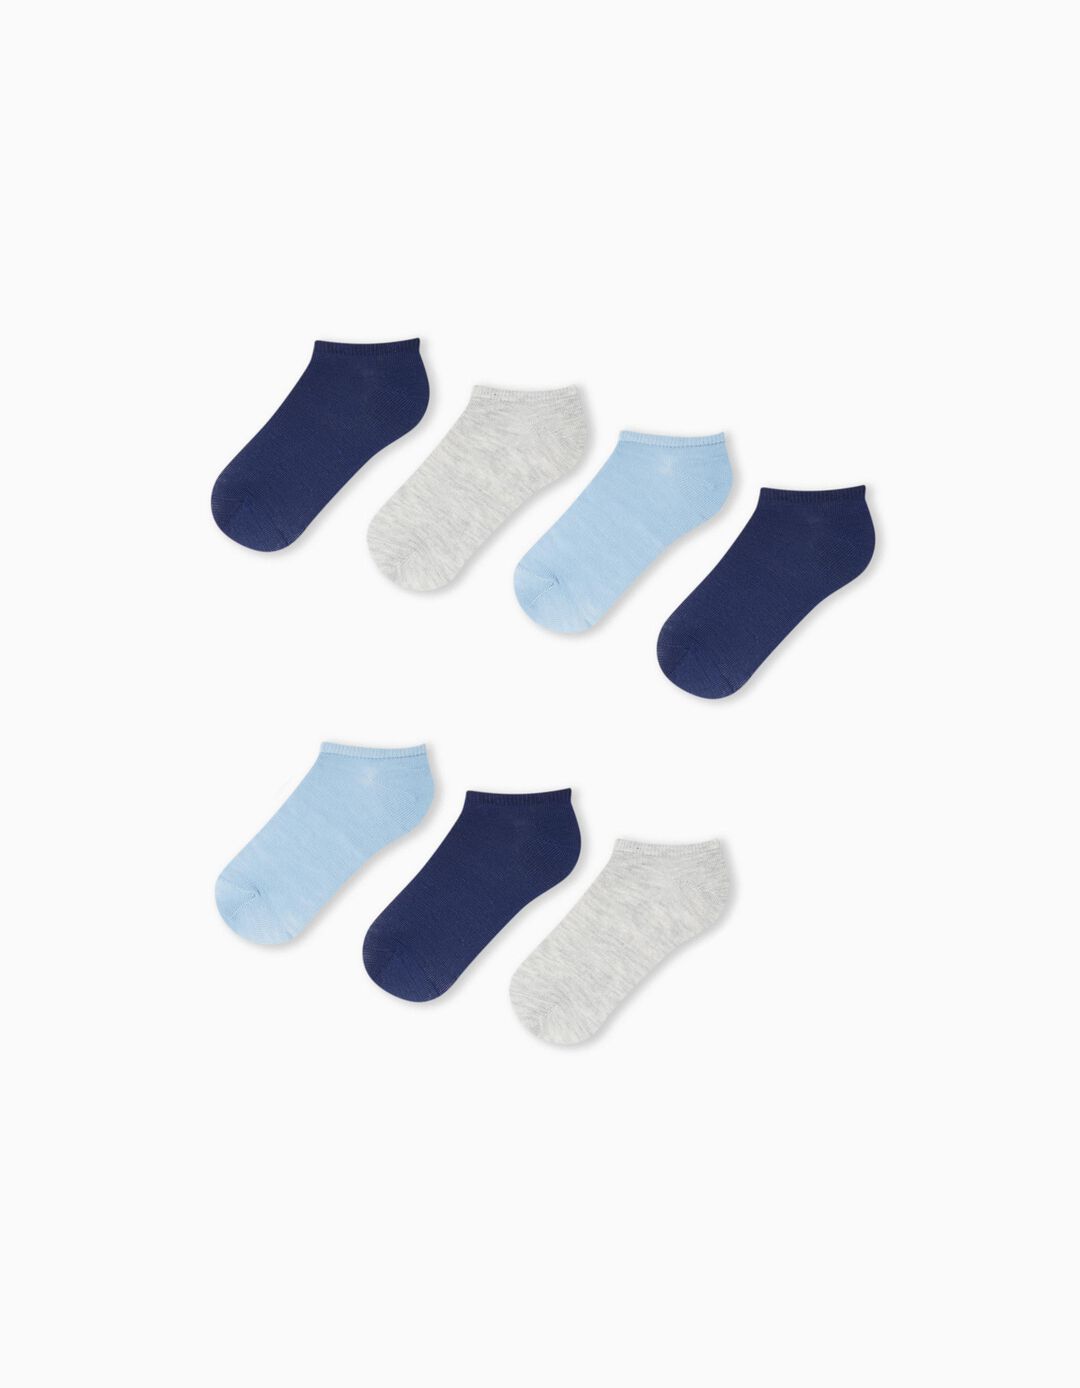 7 Pairs of Ankle Socks Pack, Boys, Multicolour